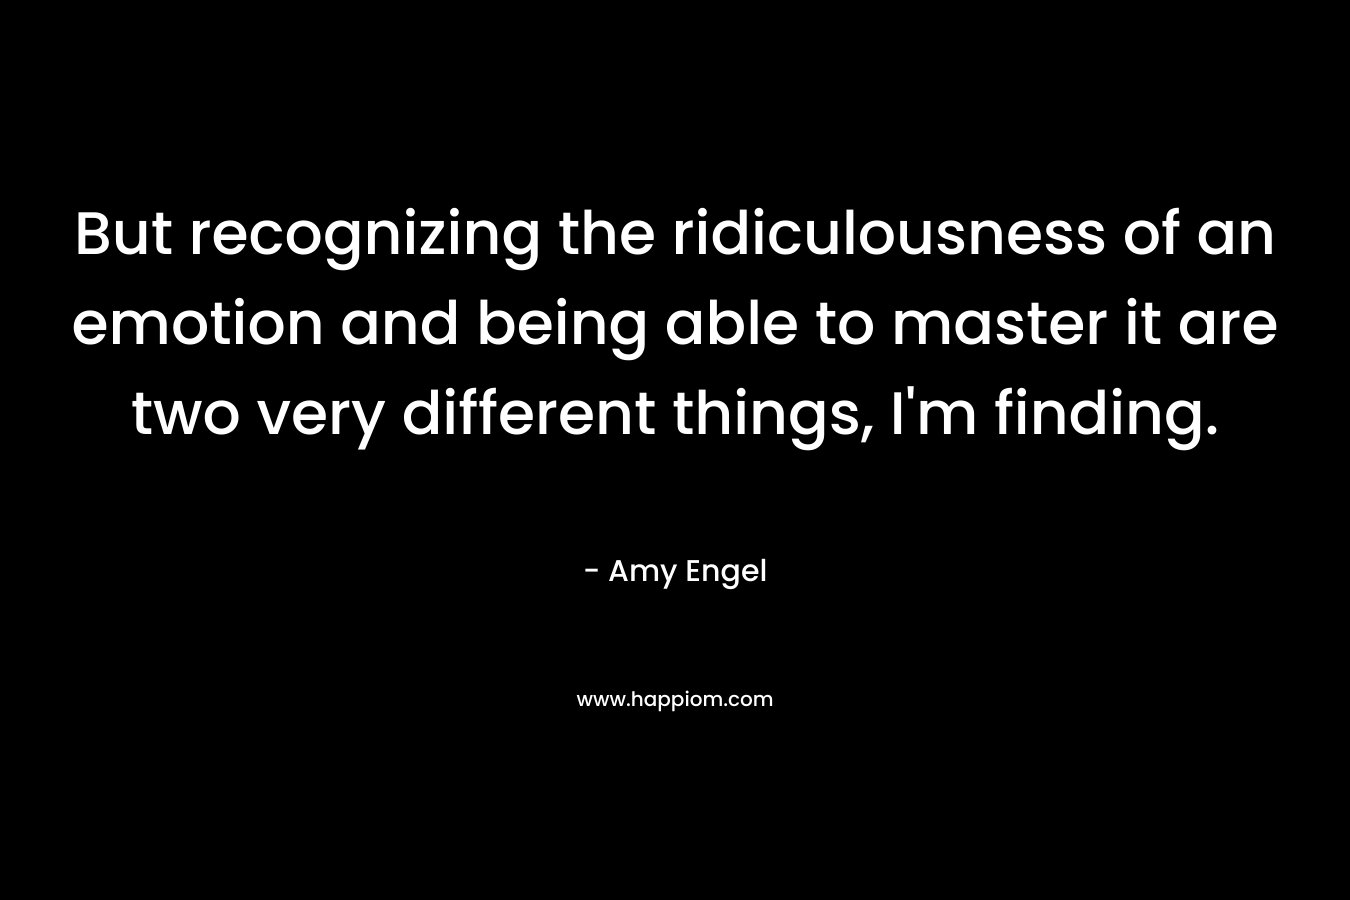 But recognizing the ridiculousness of an emotion and being able to master it are two very different things, I’m finding. – Amy Engel